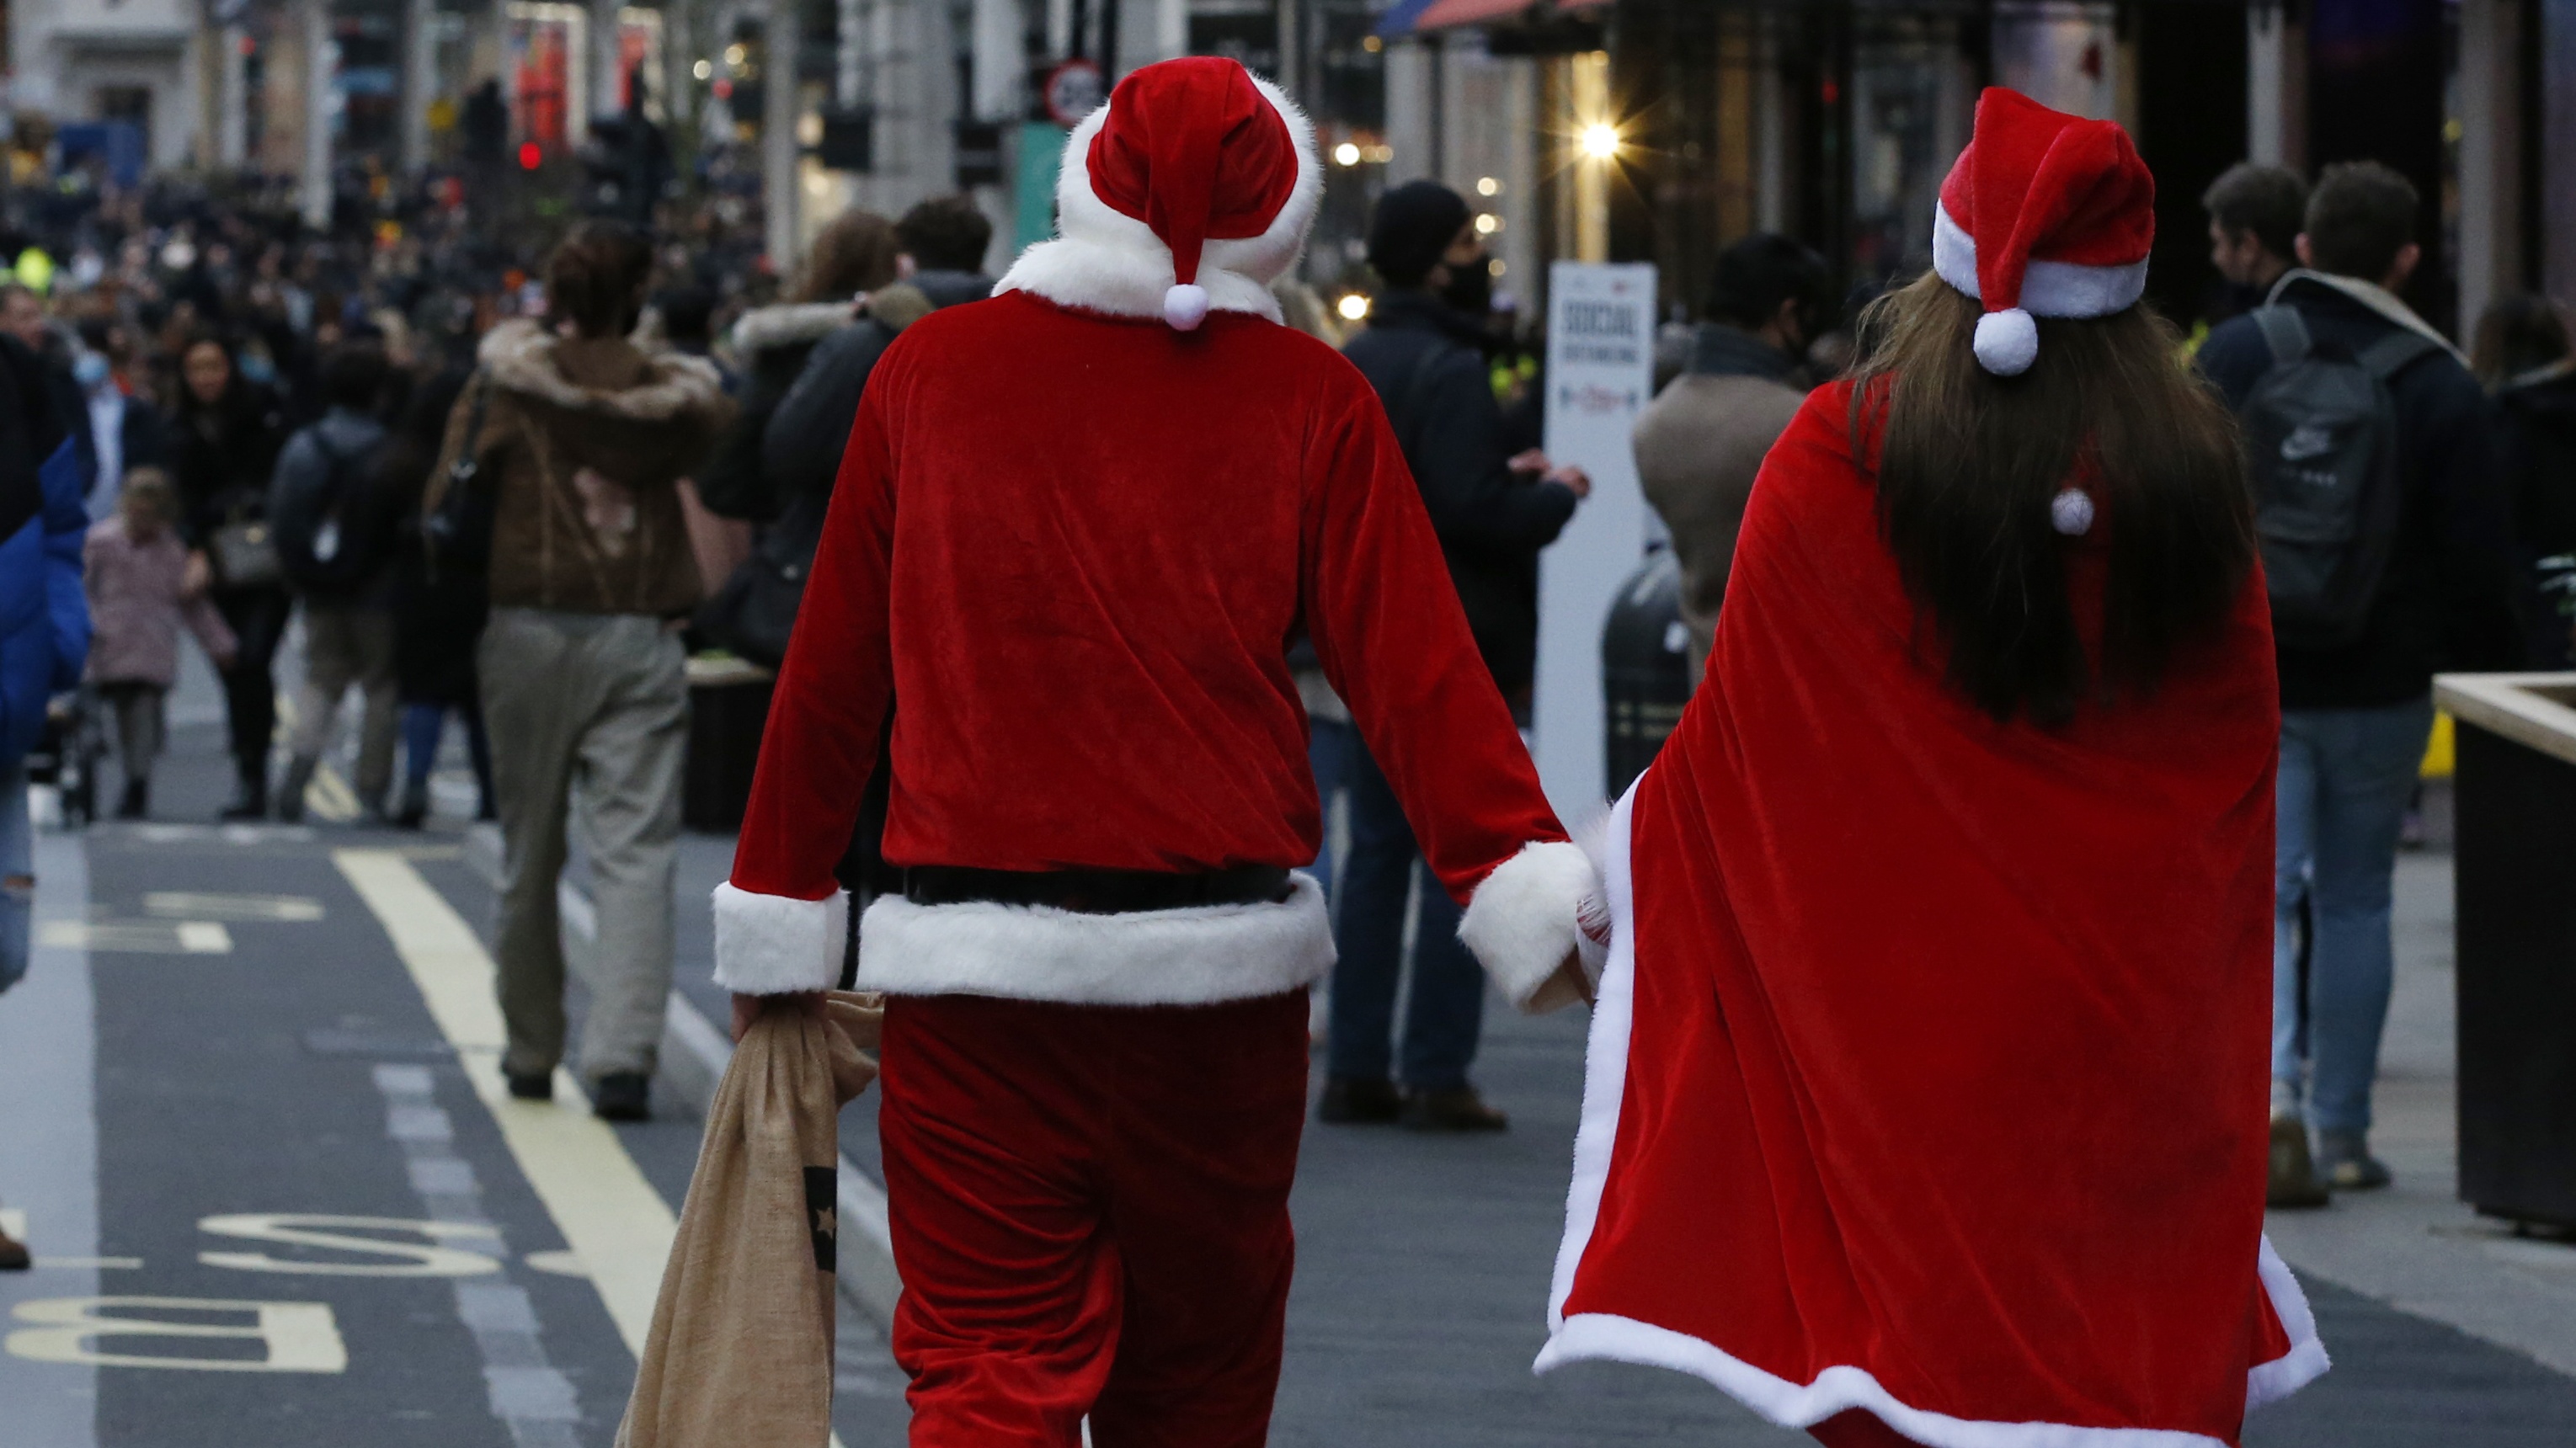 Christmas shoppers on Oxford Street, London